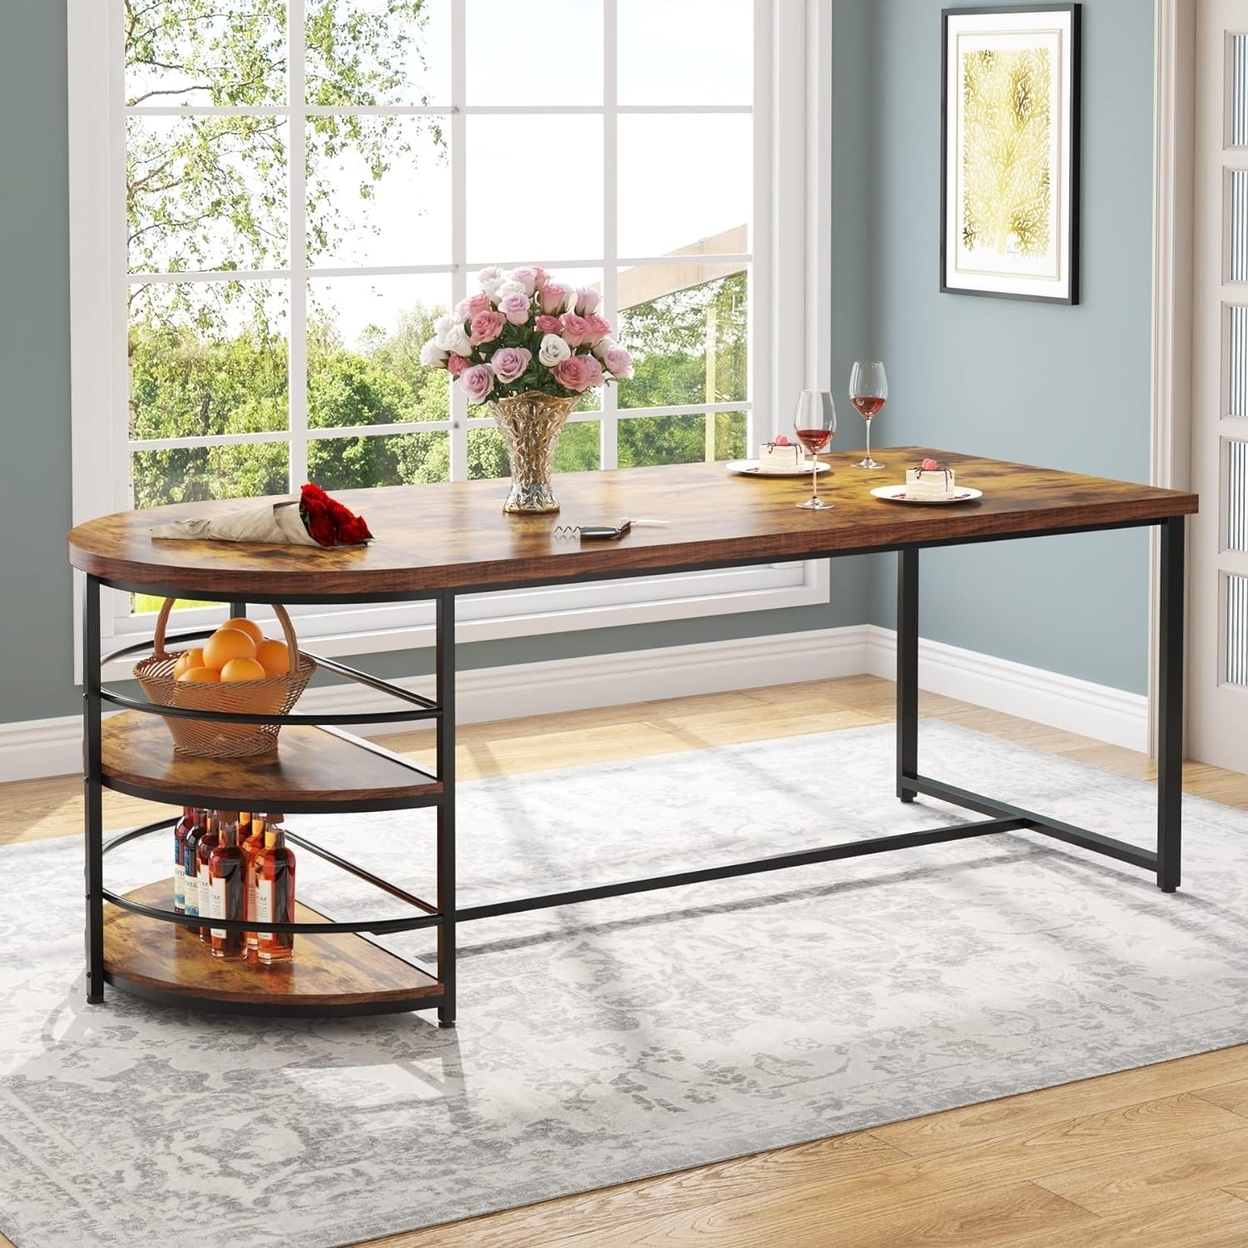 Tribesigns Dining Table For 4 With Storage Shelf, 3-Tiers Wood Kitchen Table 70.9 Long Dinner Table With Metal Frame